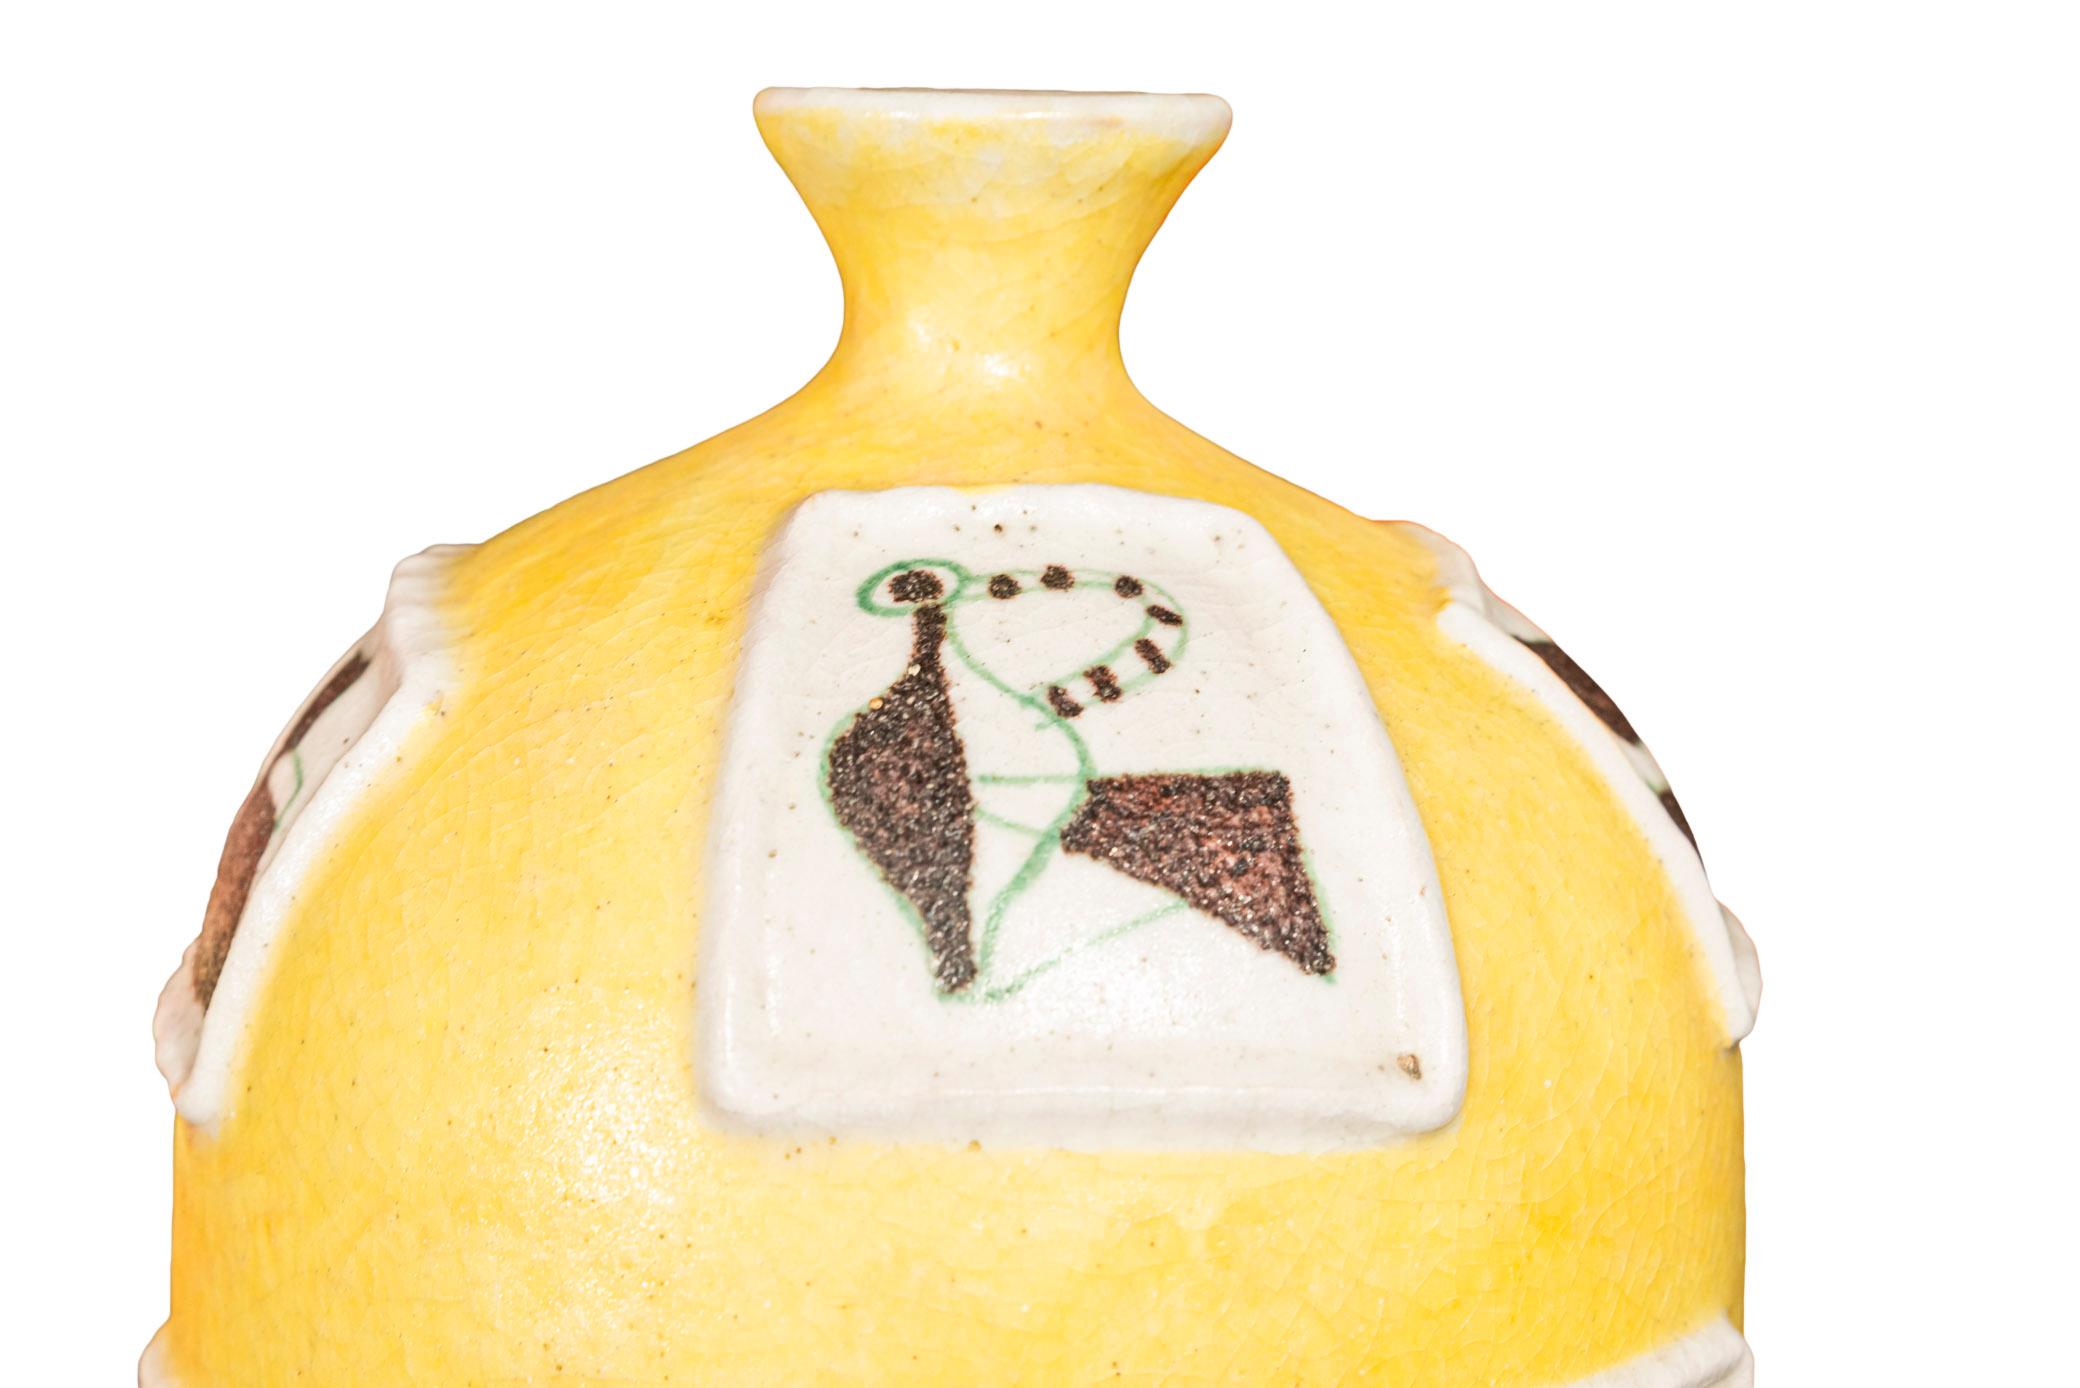 Guido Gambone (1909-1969), Bottle vase,
Enameled yellow ceramic, 
With cubist decoration,
Signed on the bottom,
Italy, circa 1950.

Measures: Height 46 cm, diameter 18 cm.

Guido Gambone (1909 – 1969) is one of the most important and influential